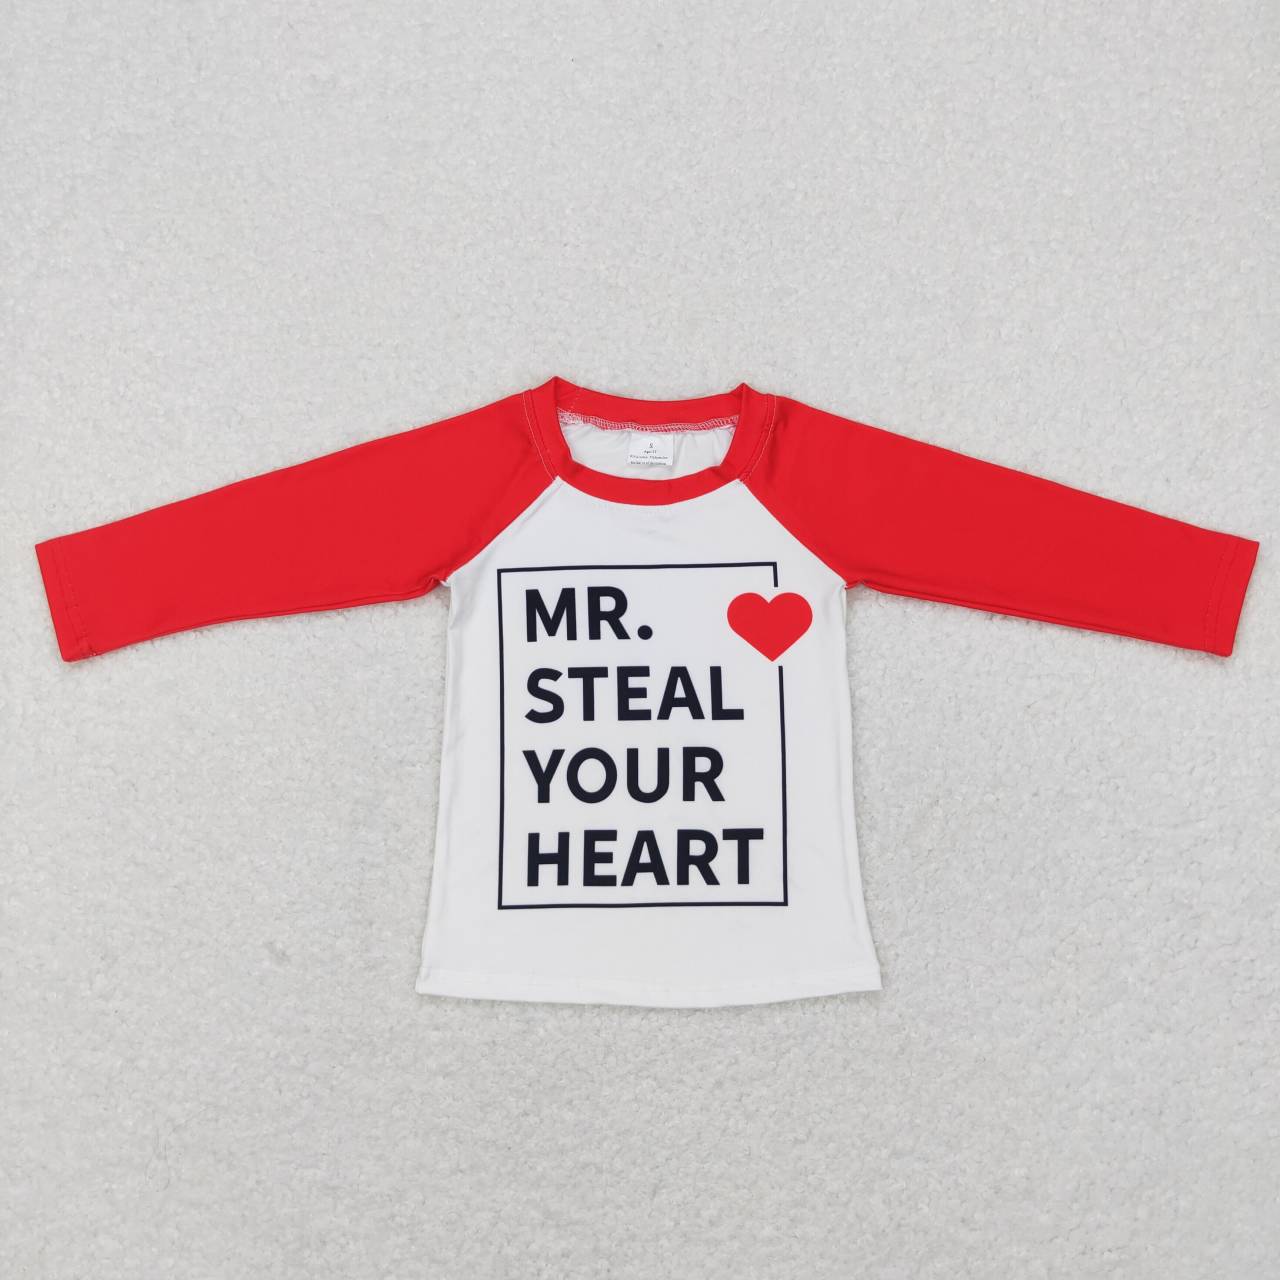 BT0441 mr. steal your heart red and white long-sleeved top